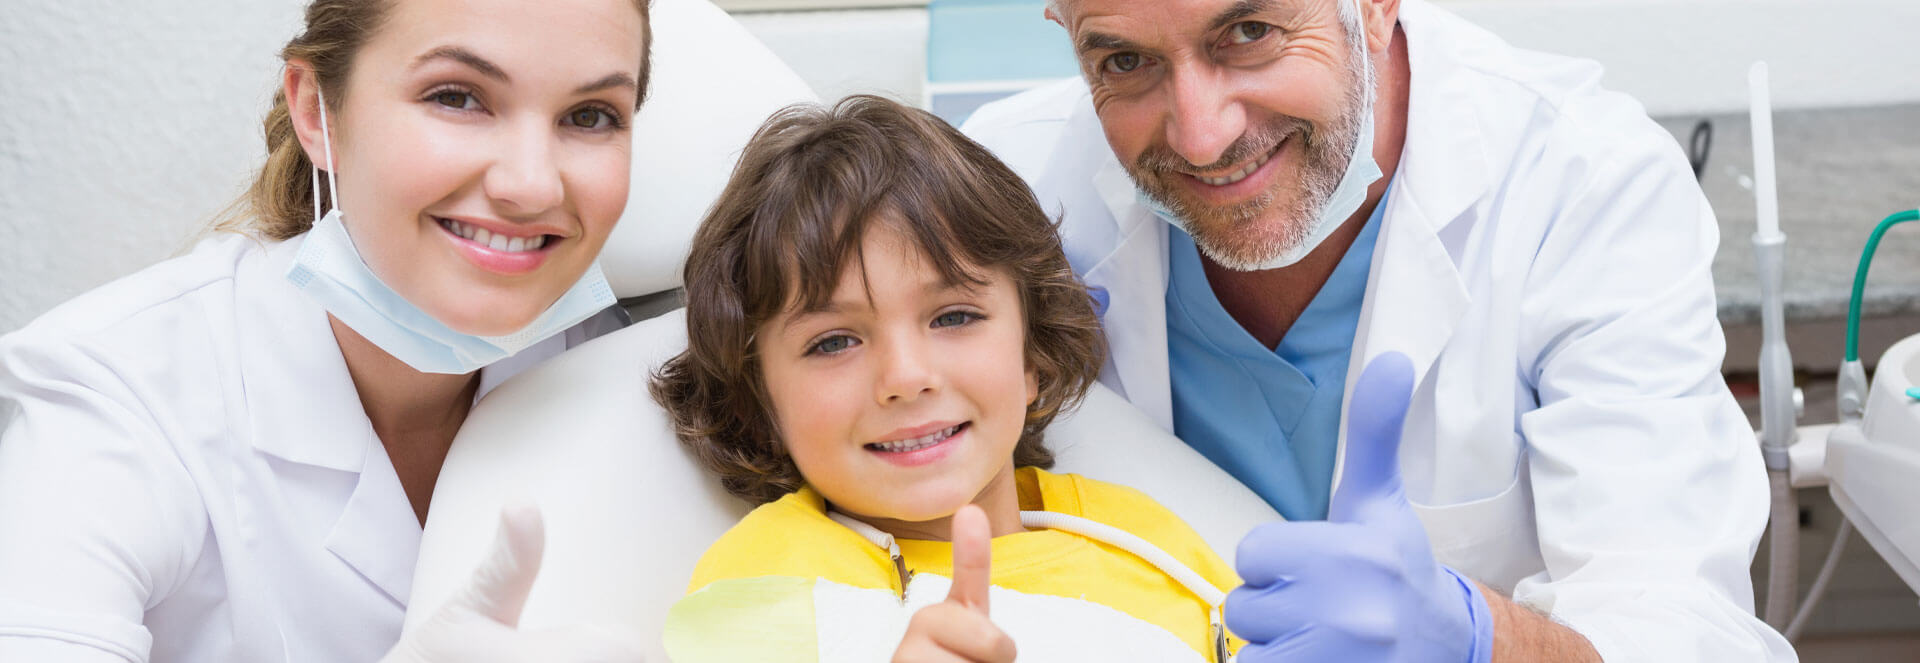 Dental assistant, young child, and dentist all smiling at the camera and showing thumbs up